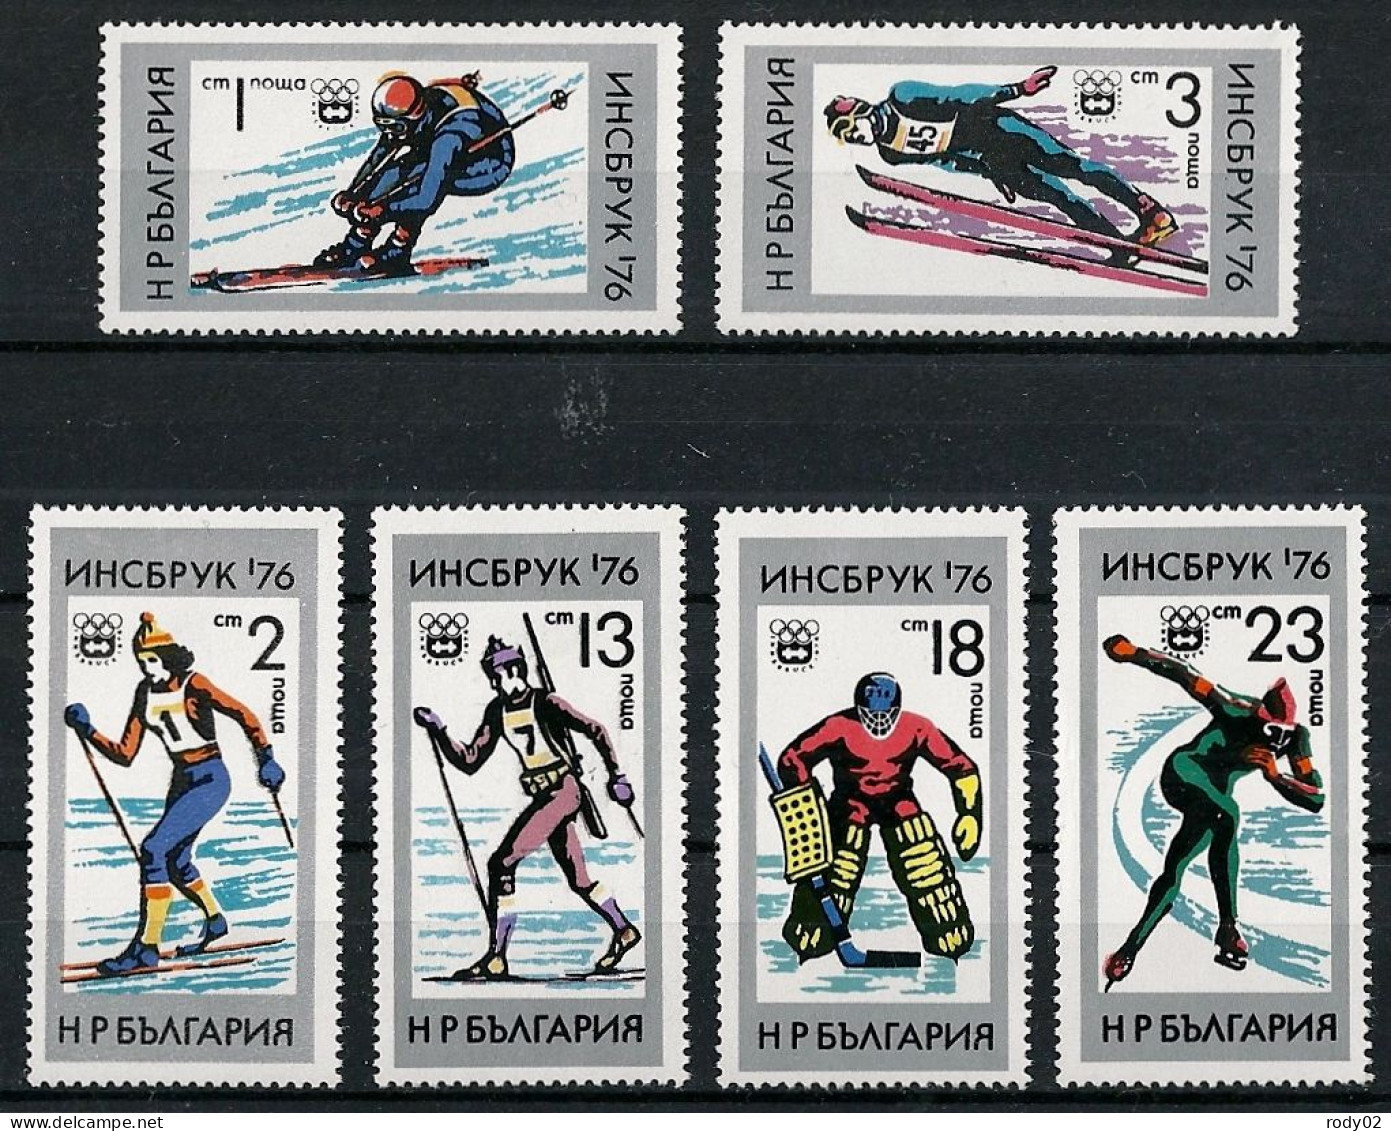 BULGARIE - JEUX OLYMPIQUES D'HIVER A INNSBRUCK  - N° 2186 A 2191 - NEUF** MNH - Inverno1976: Innsbruck